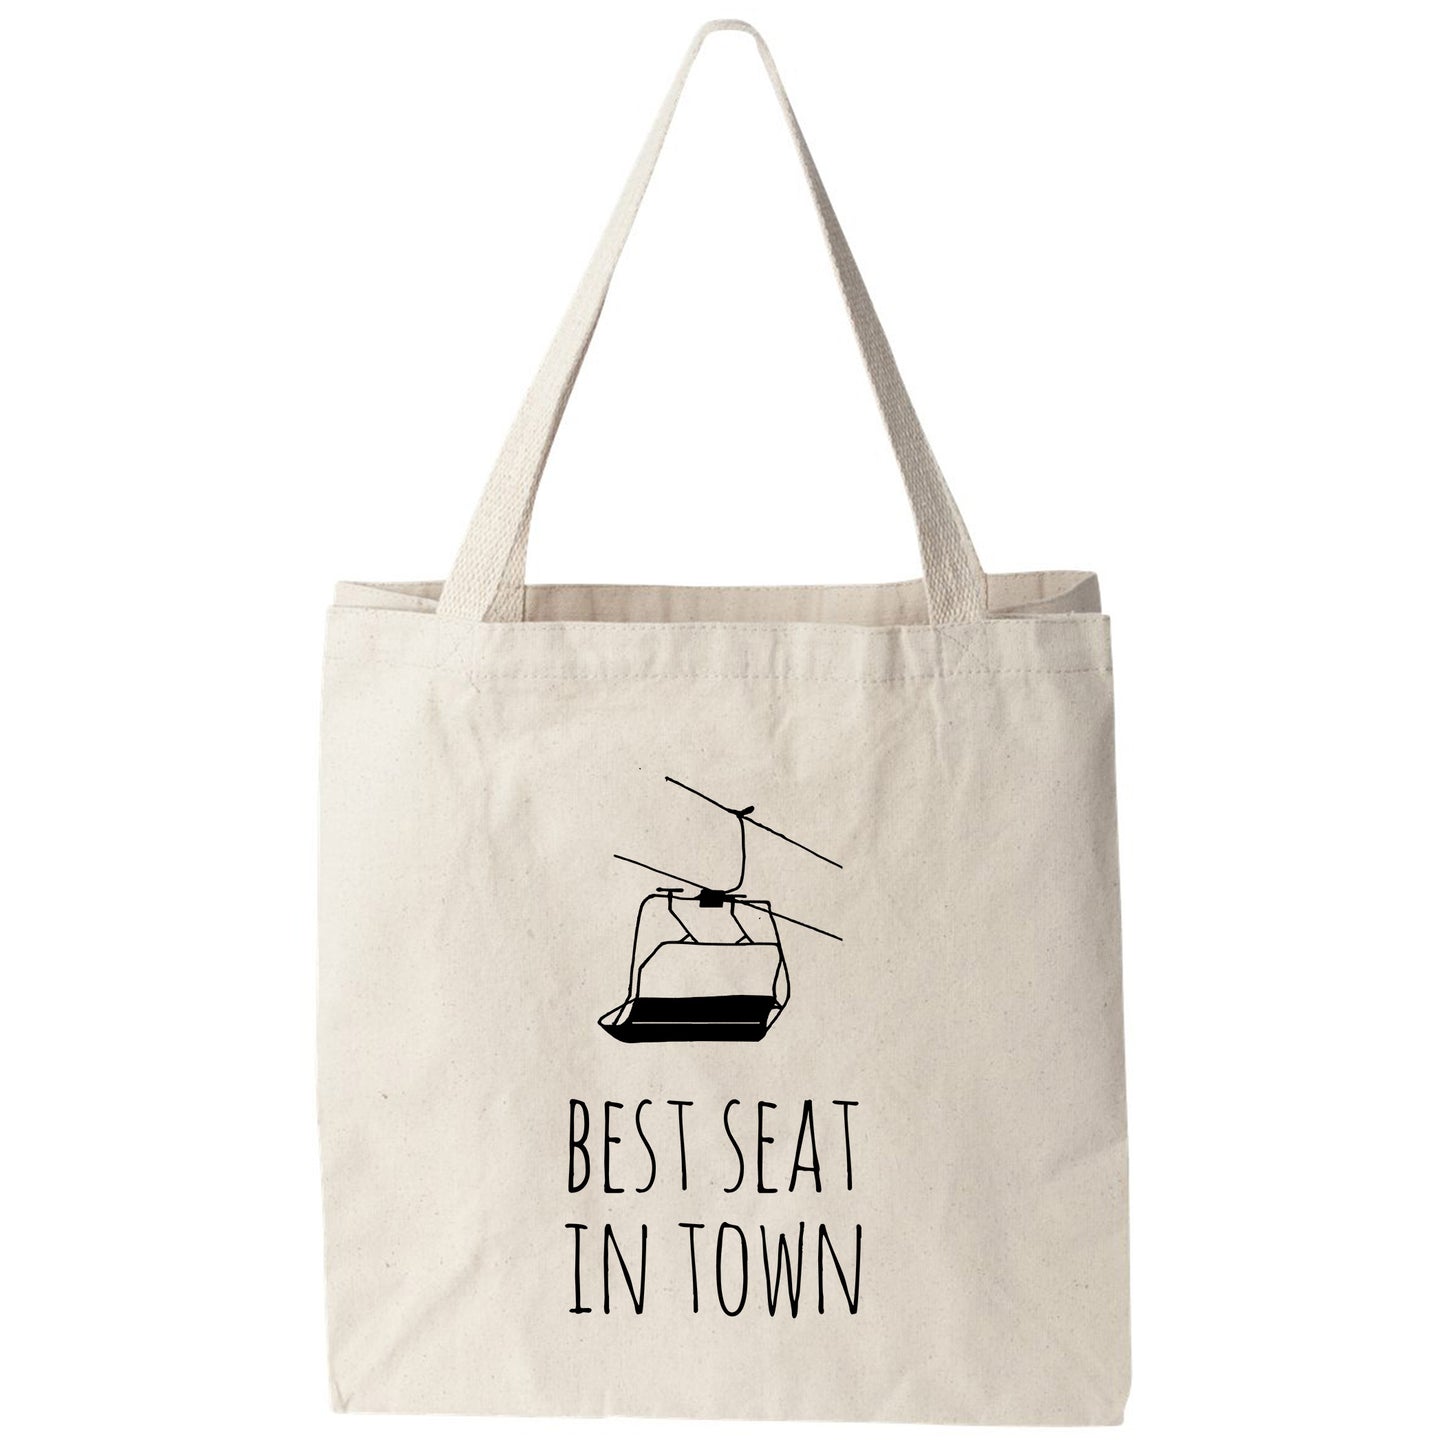 a tote bag that says best seat in town